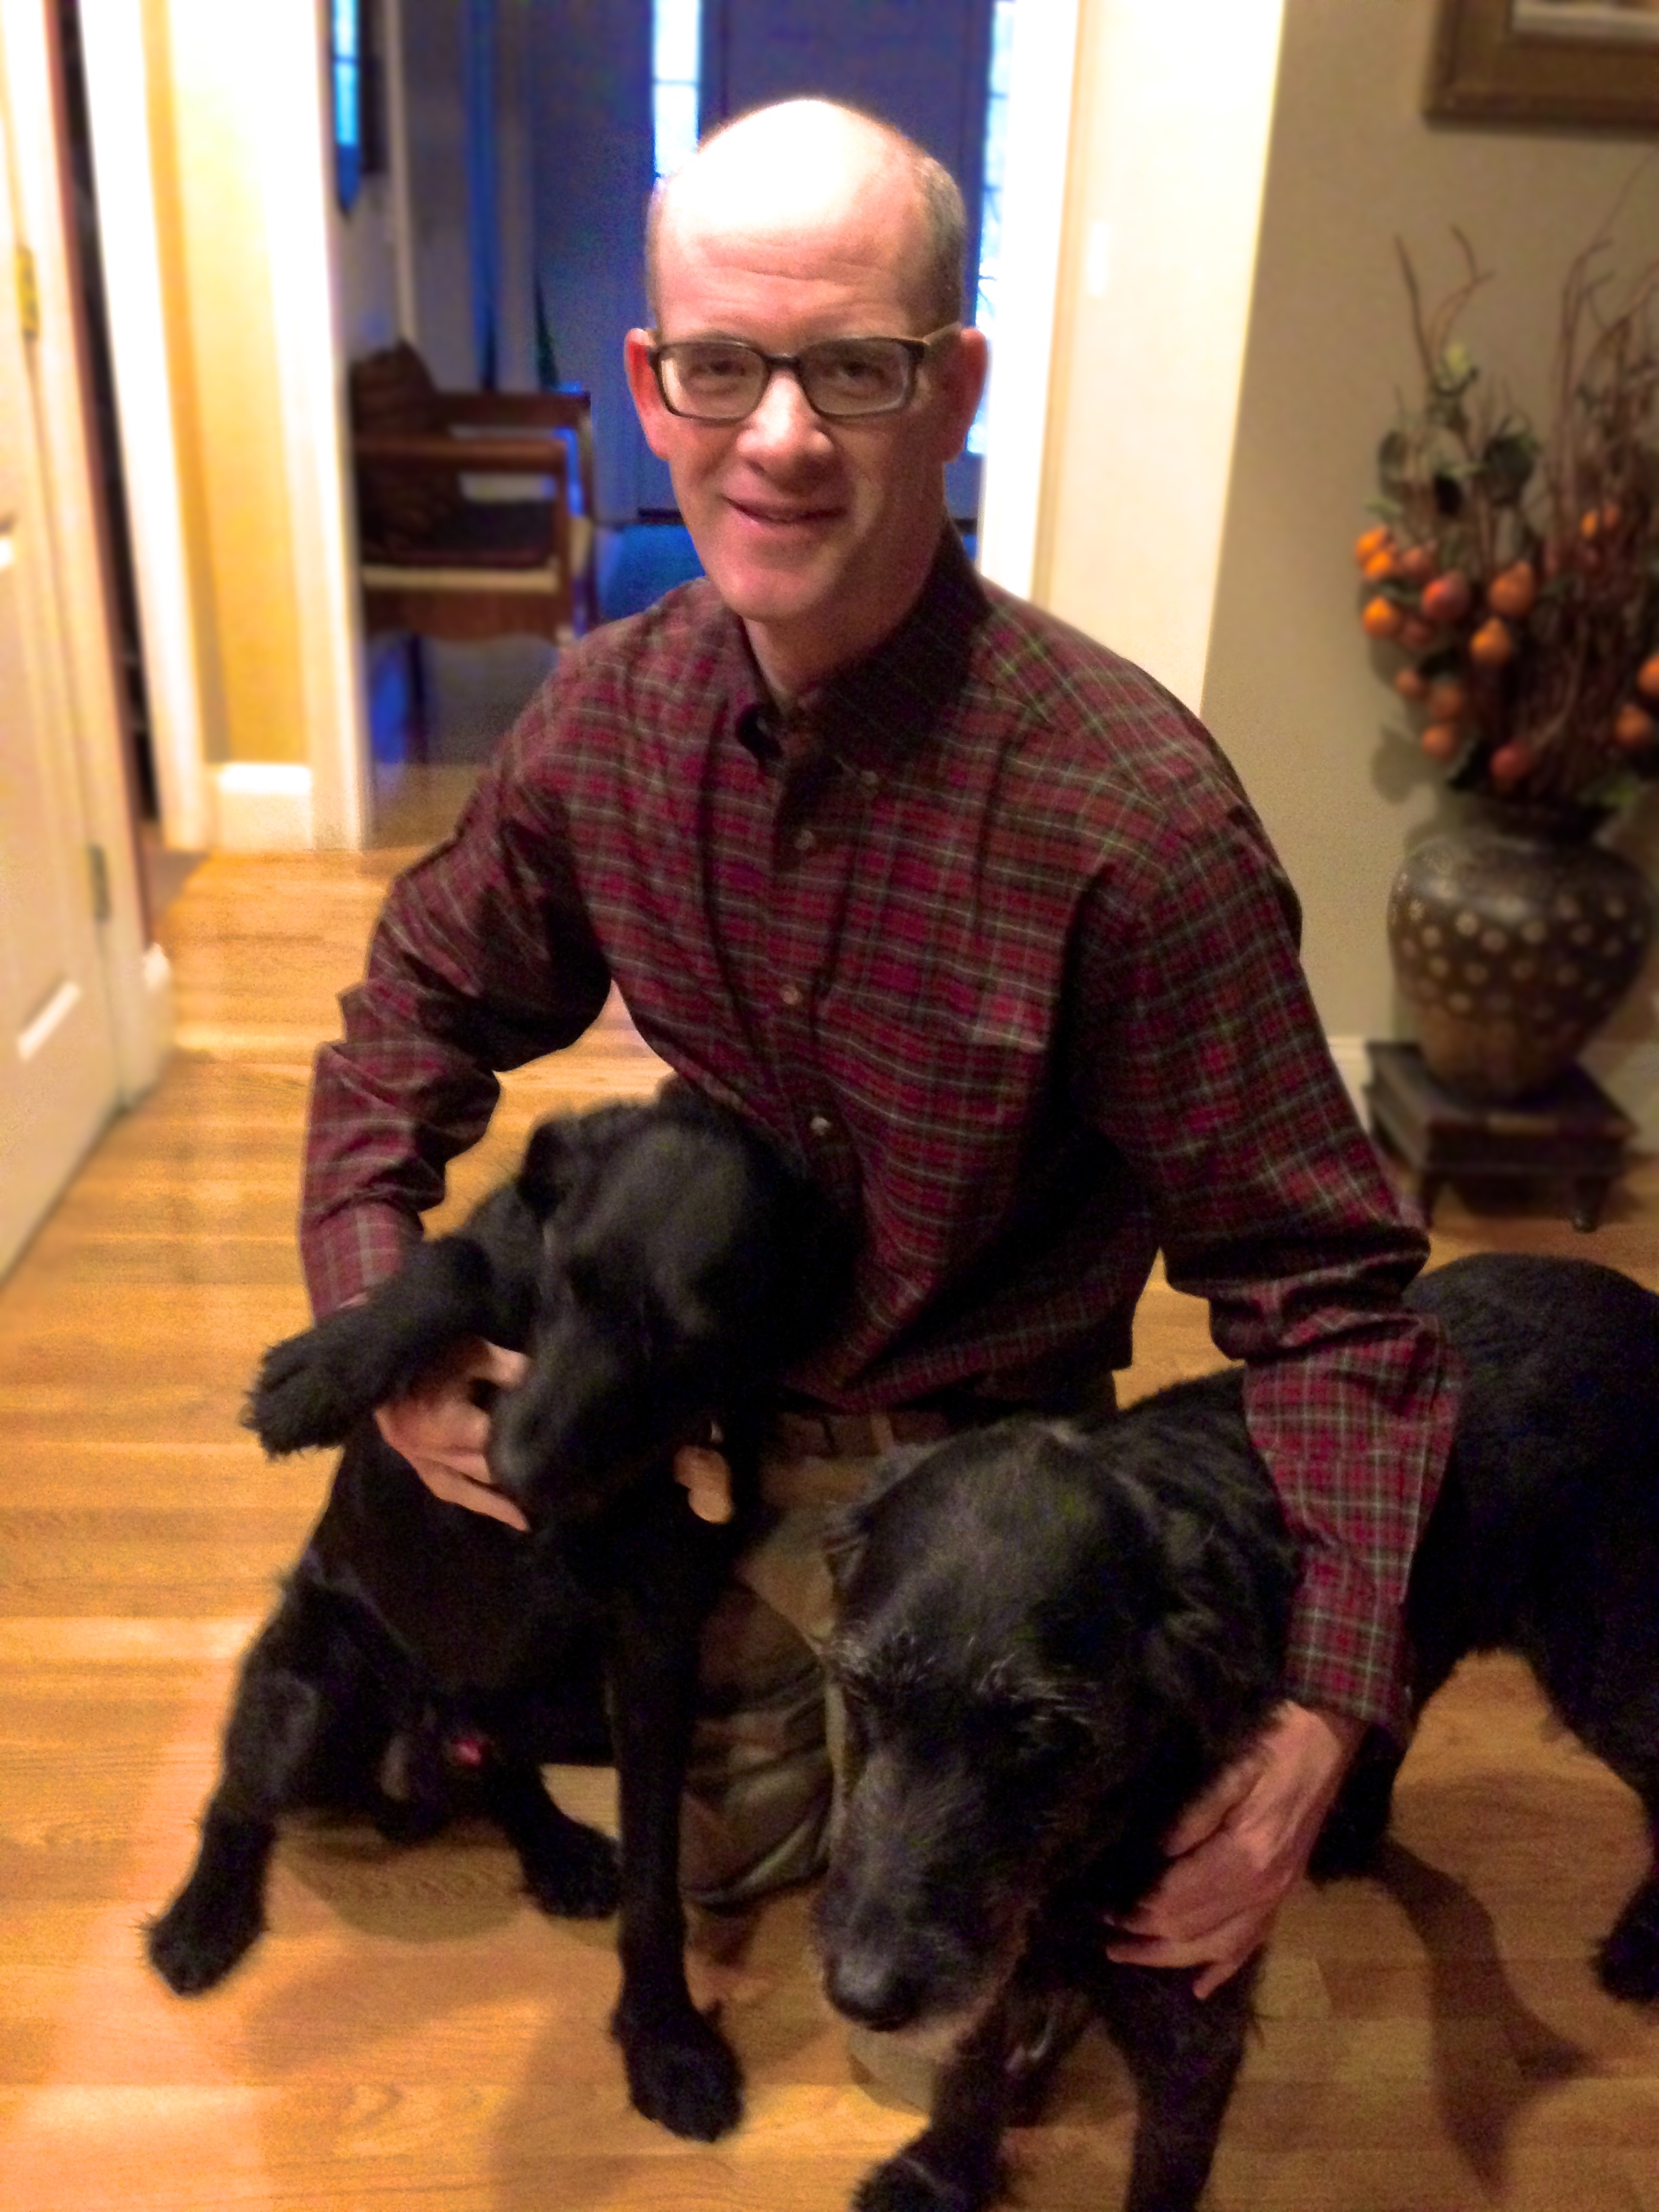 Mooney, who will use funding from the Michelson Grant to research a nonsurgical alternative to spaying and neutering dogs and cats, is pictured at home with his two dogs. Credit: Dave Mooney